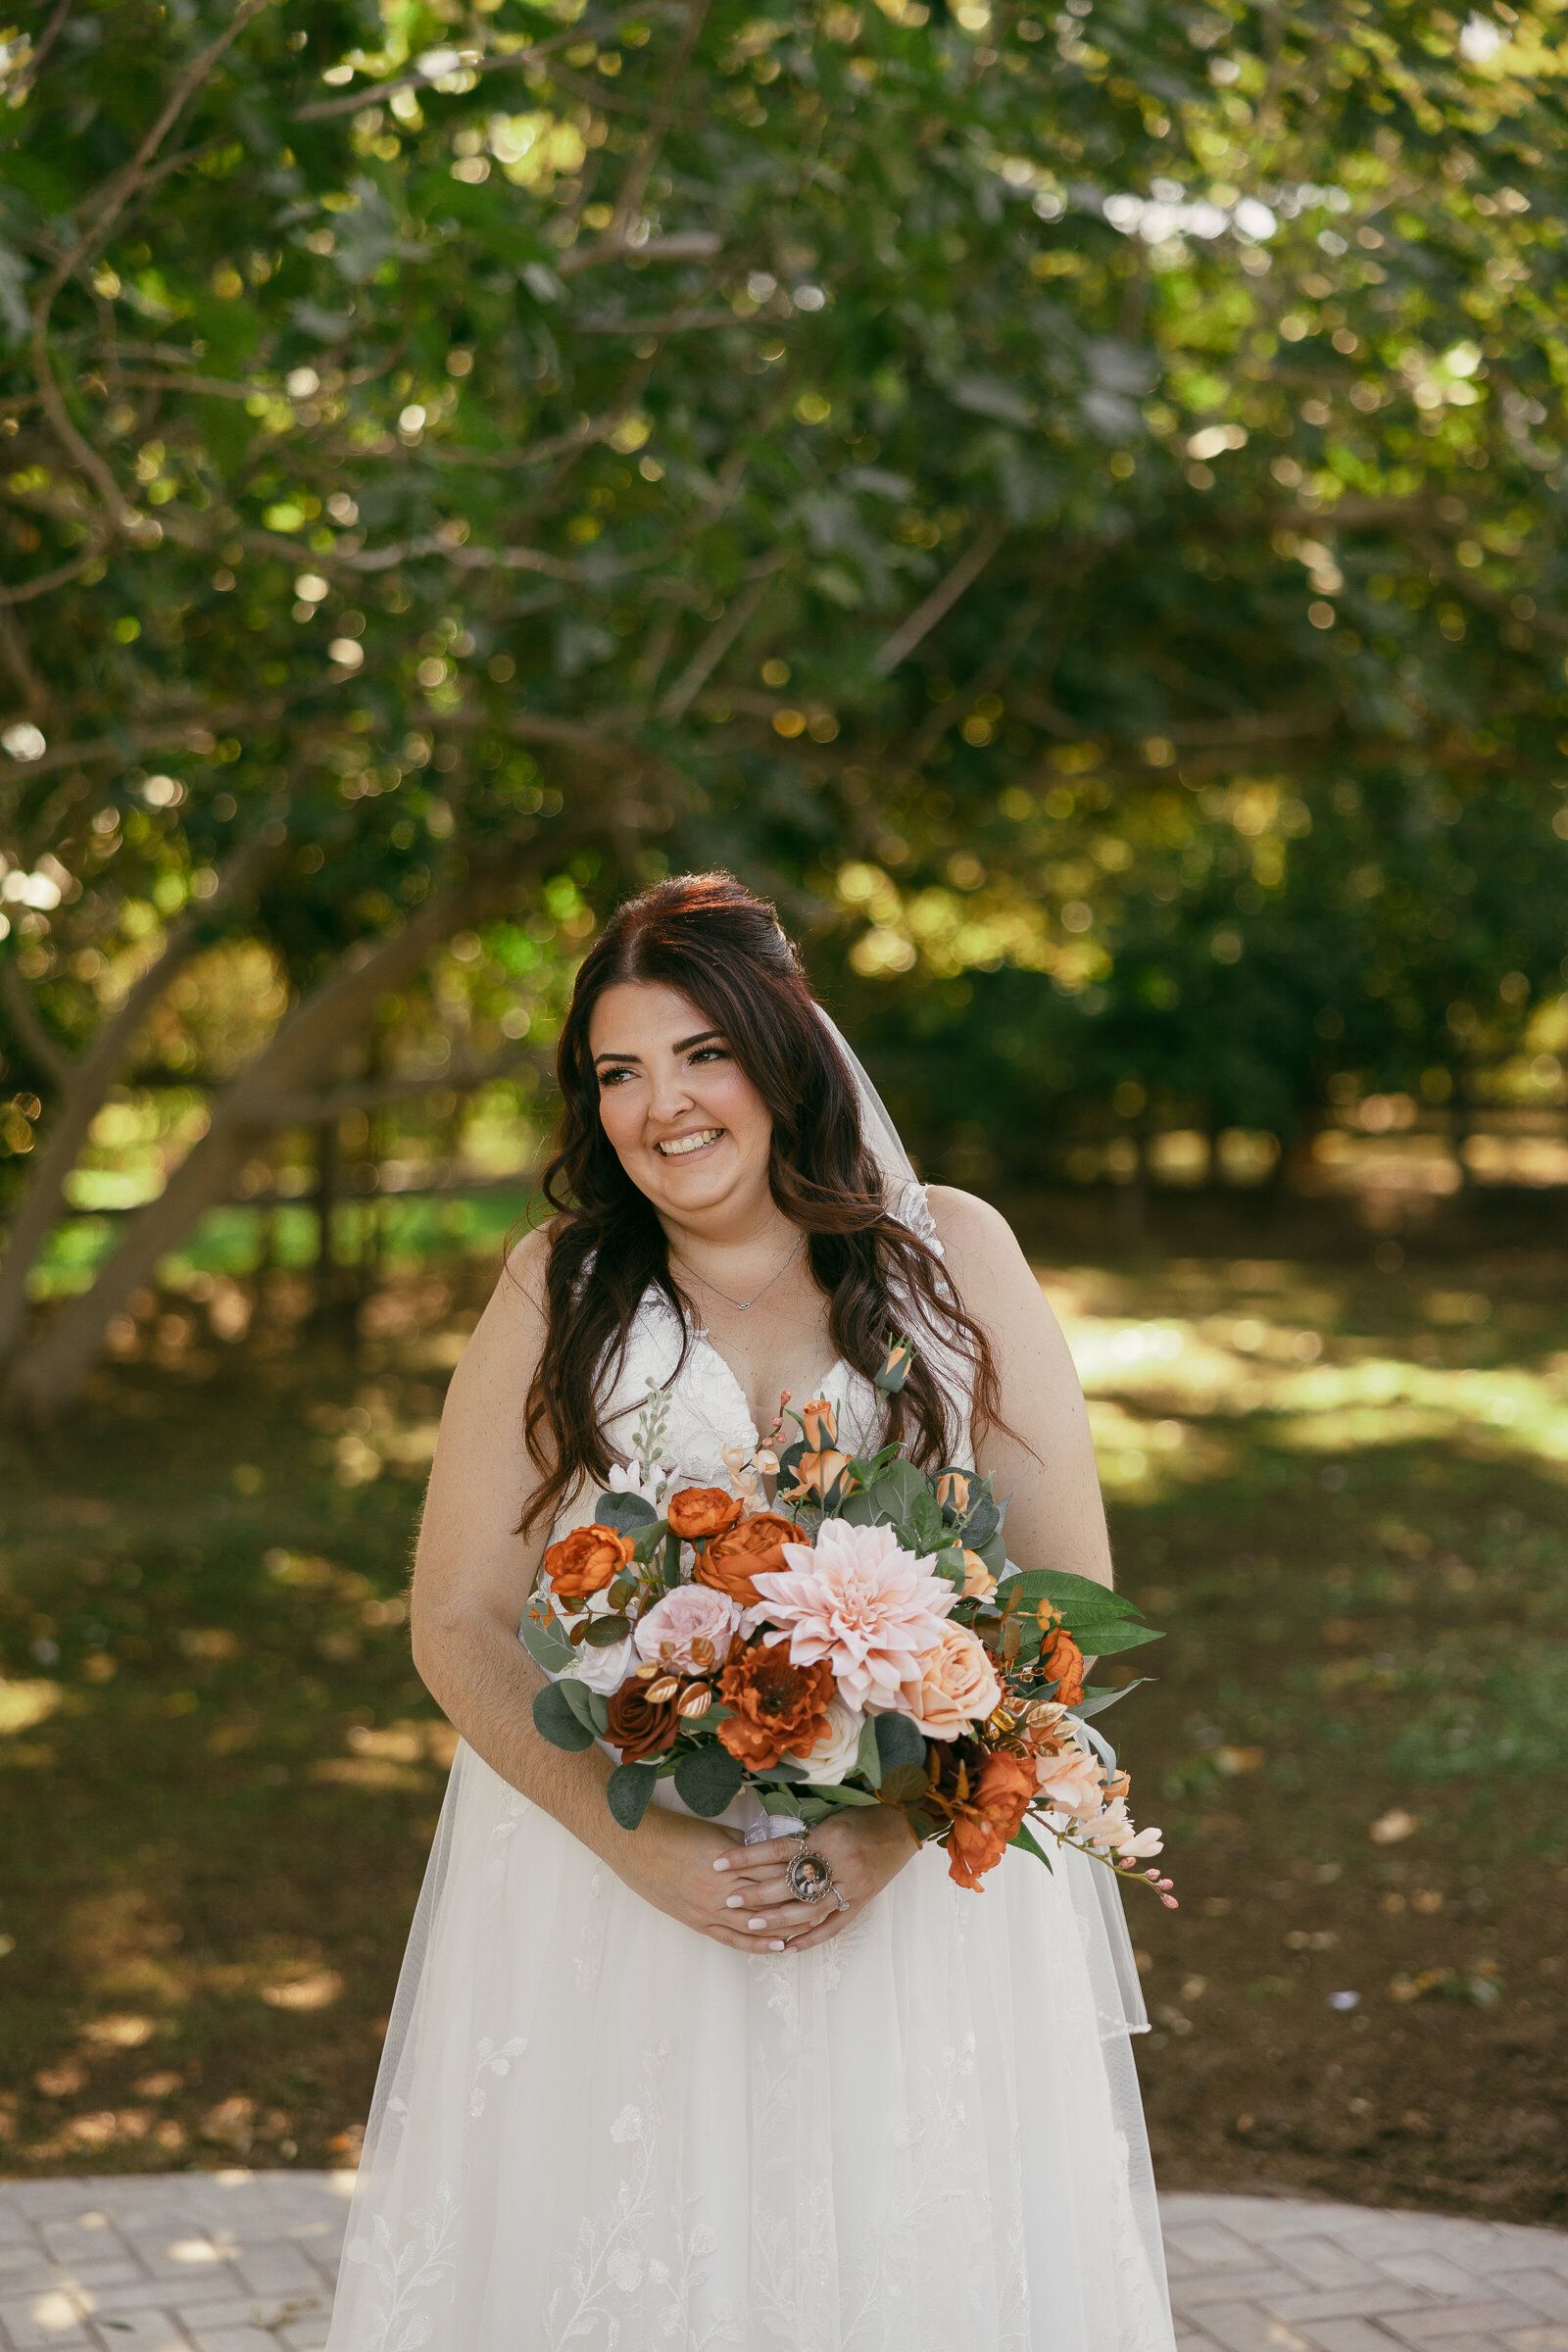 A bride smiling while holding a bouquet of flowers.